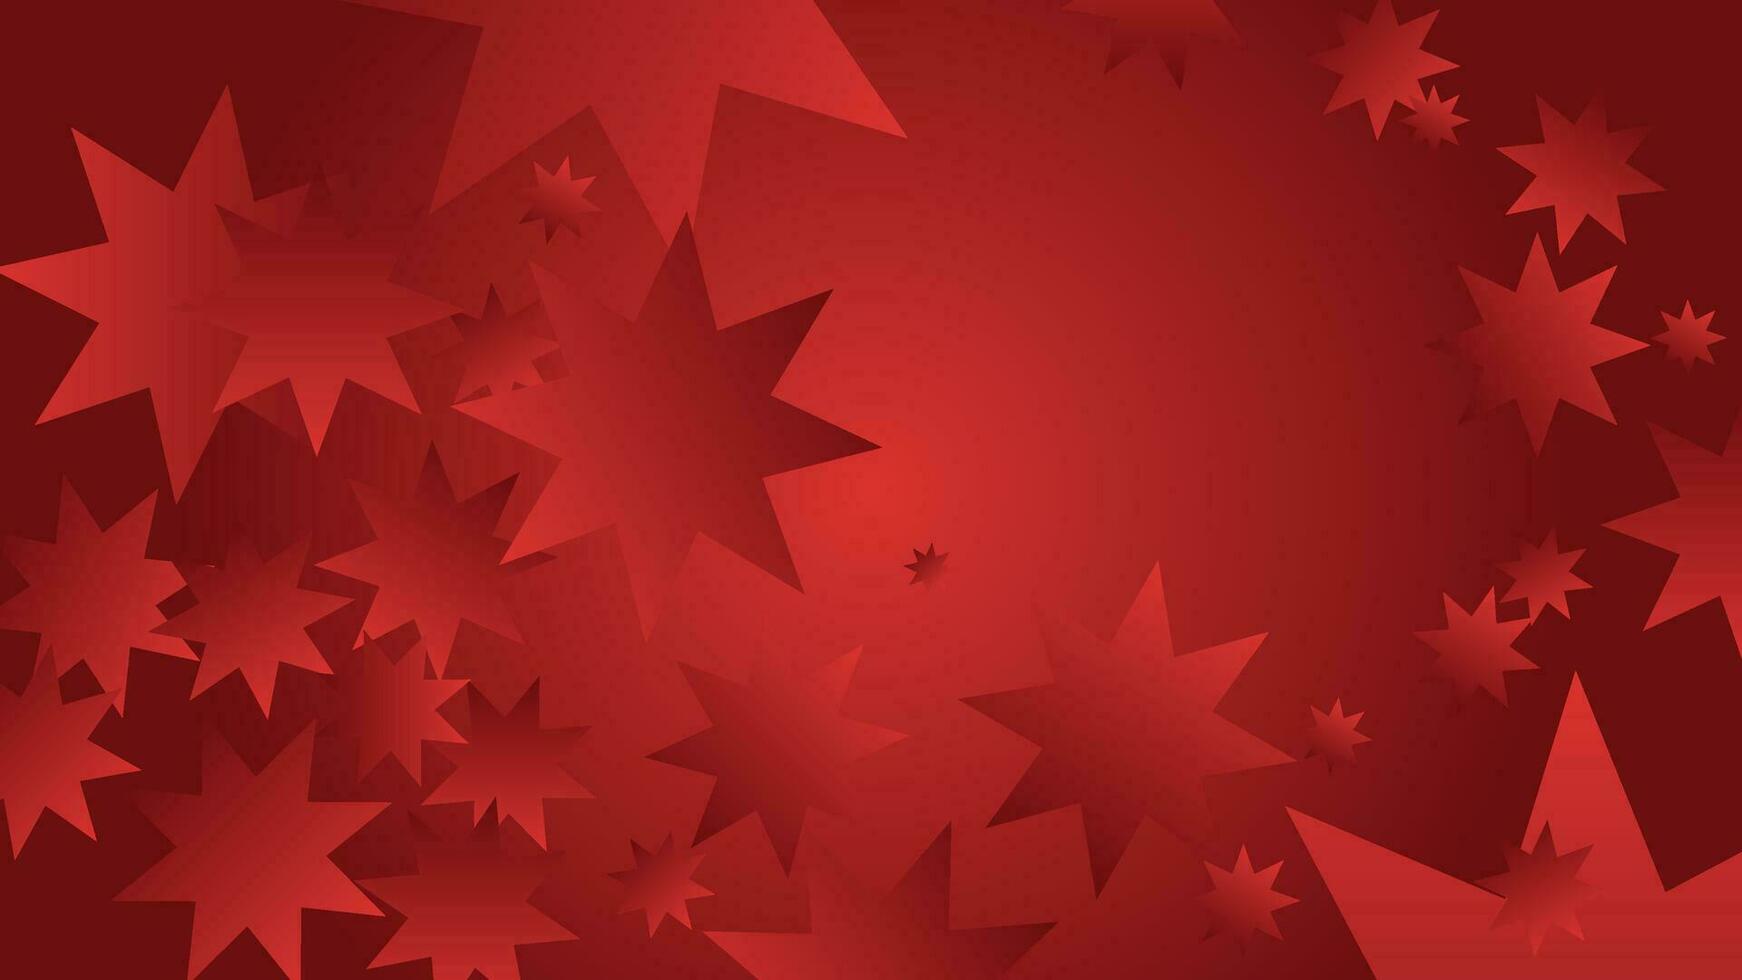 Abstract Premium background 3d red line isolated red background. Modern futuristic graphic design element. suitable for presentation background vector